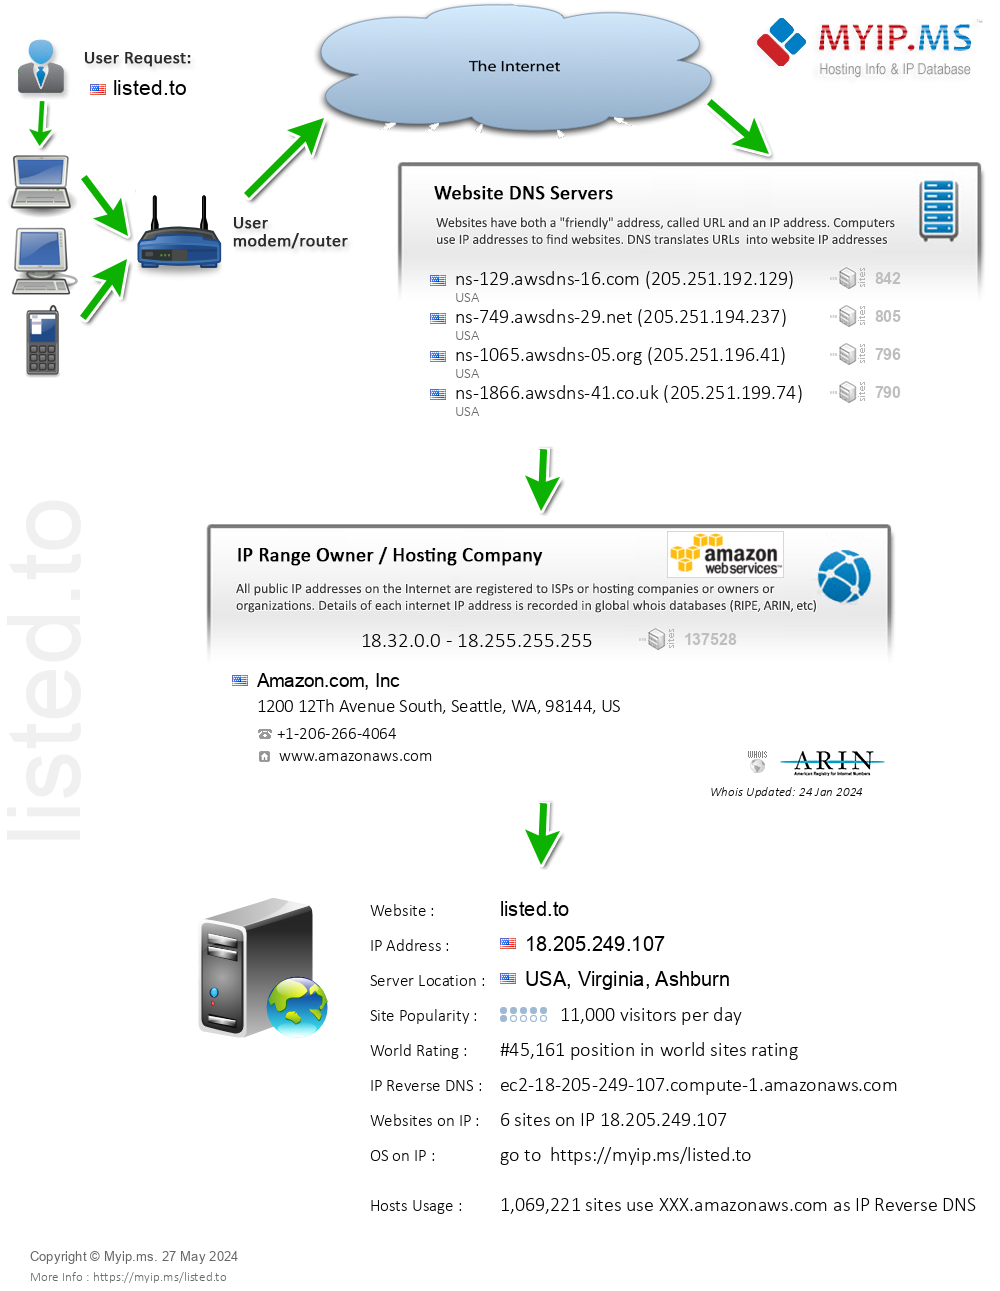 Listed.to - Website Hosting Visual IP Diagram